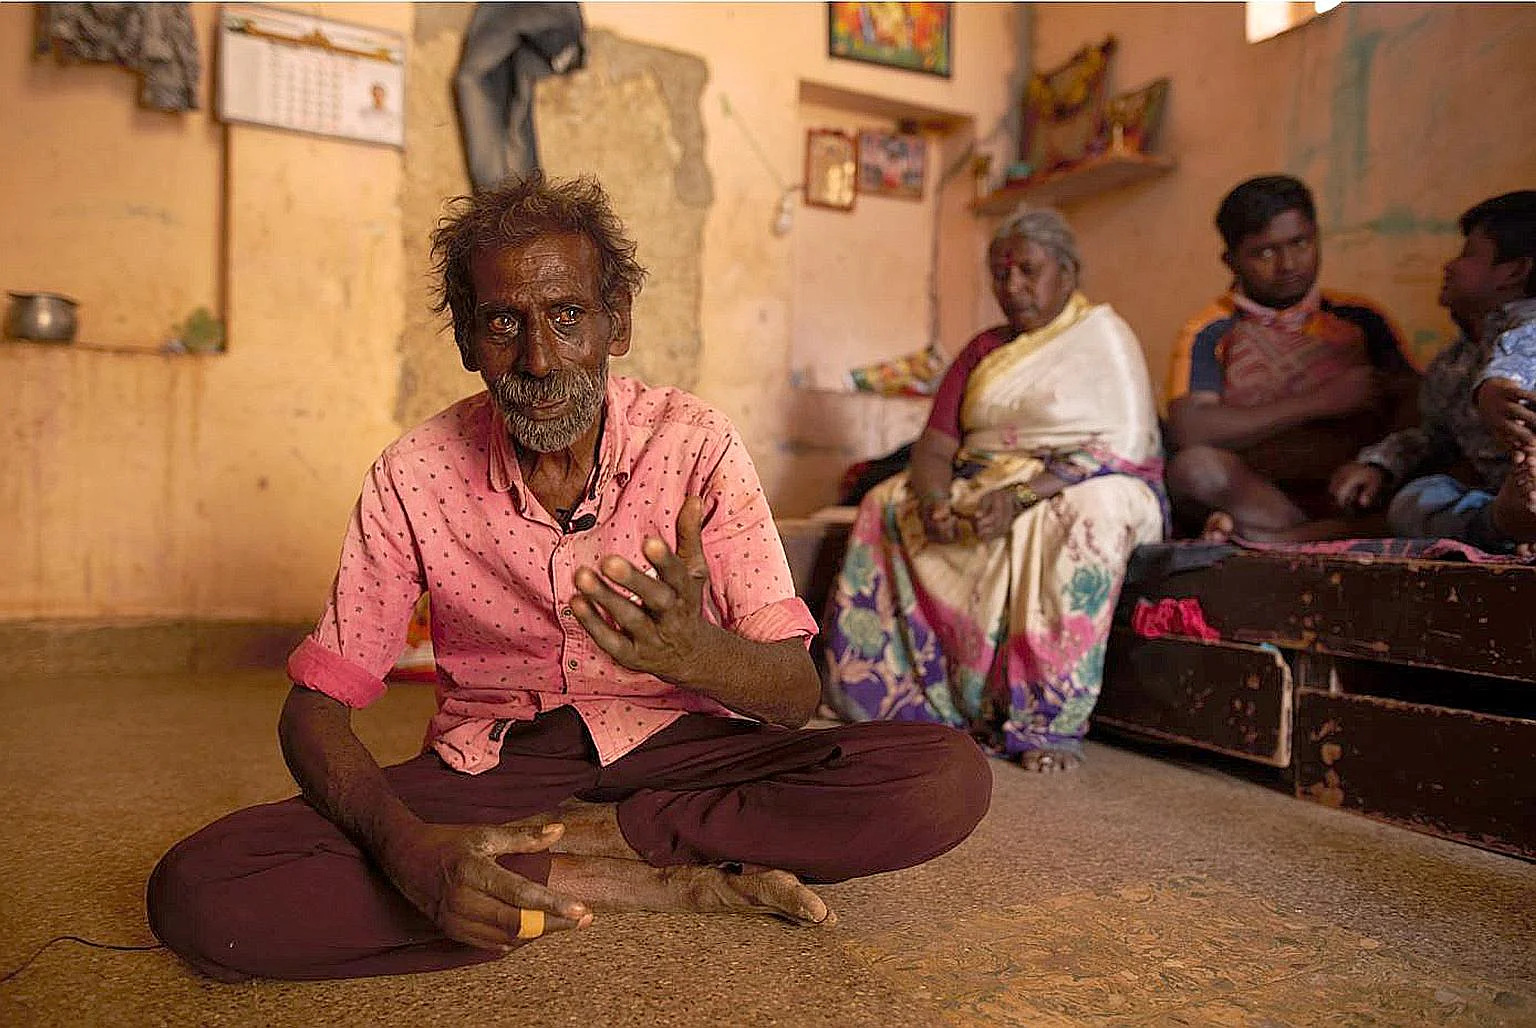 Mr Munisamy Katappa at home with his family. He says he drinks so he can "endure the horrid stink of excrement, and the disgust and humiliation" that he feels. Photo: Arvind Dev.